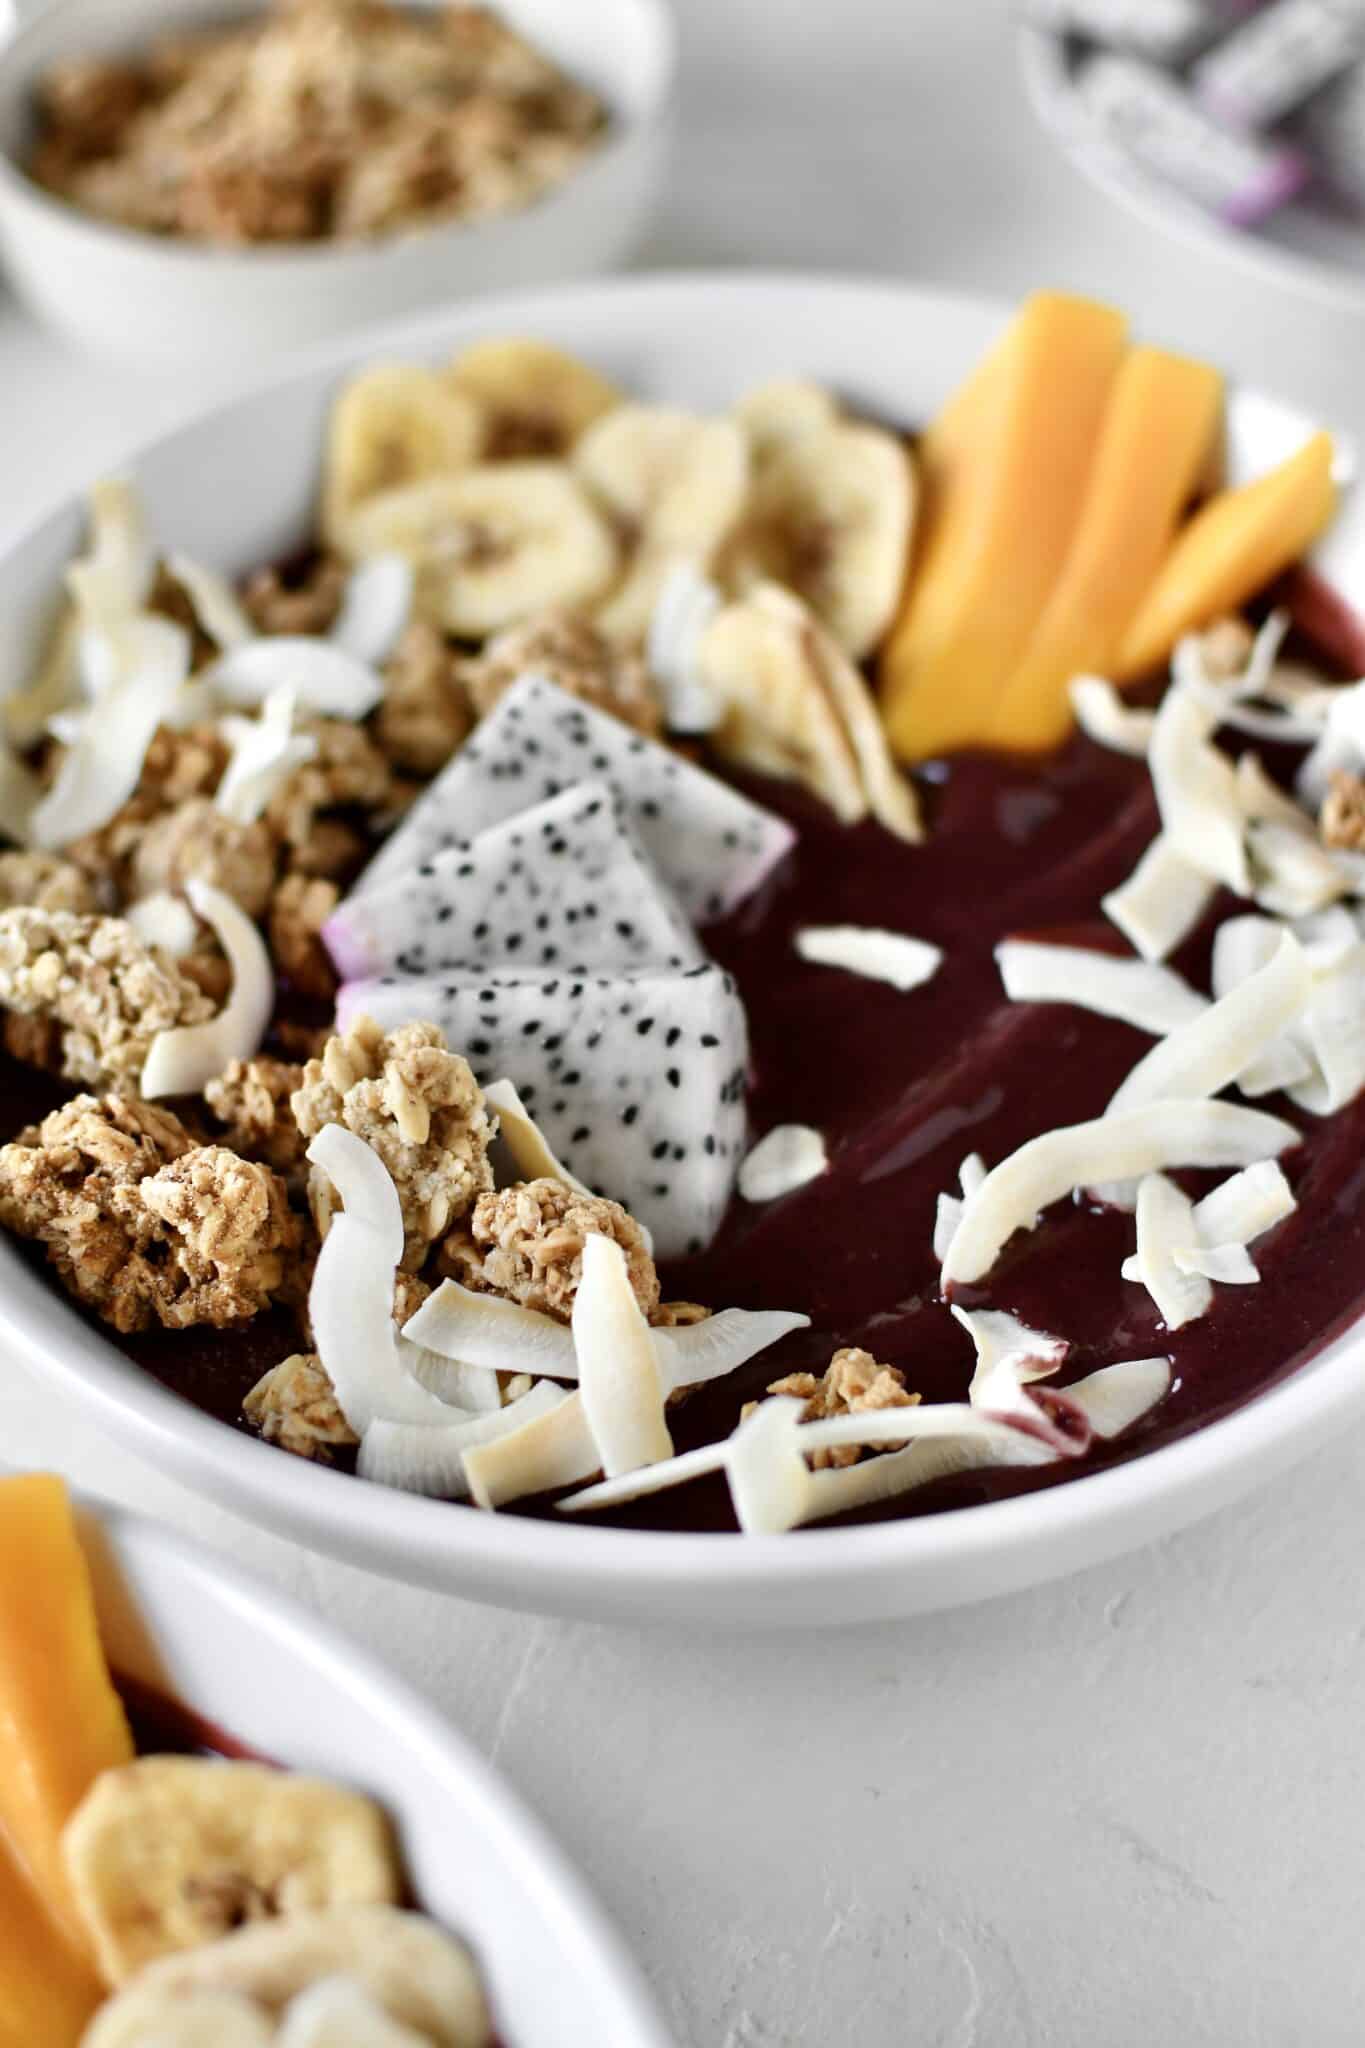 Smoothie Bowl, topped with fresh and dried fruit, ready to eat.